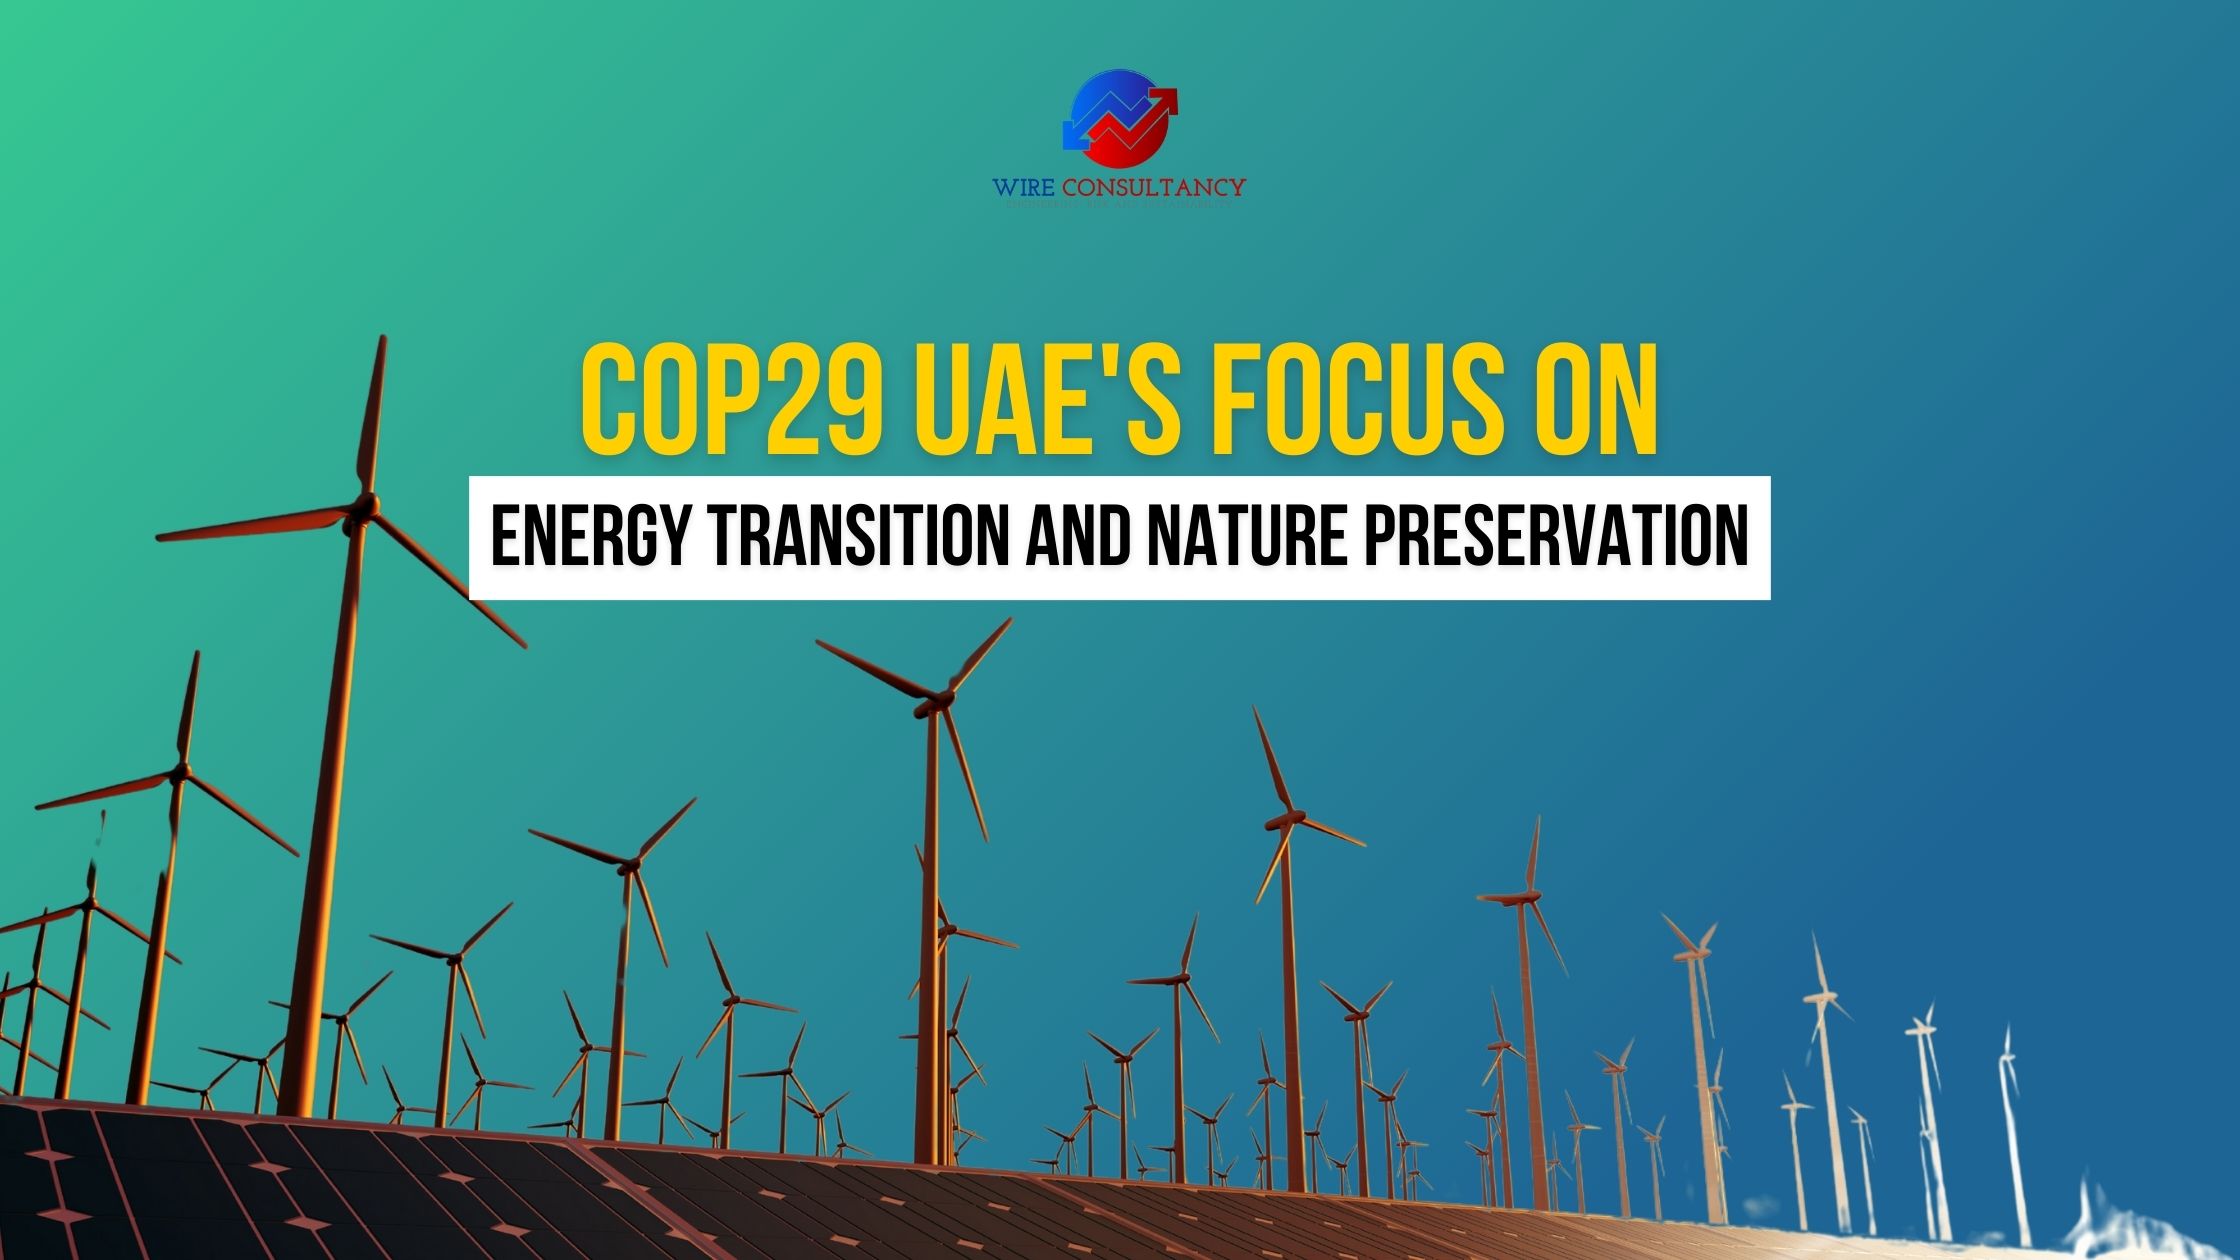 COP28 UAE: Accelerating the Energy Transition and Protecting Nature